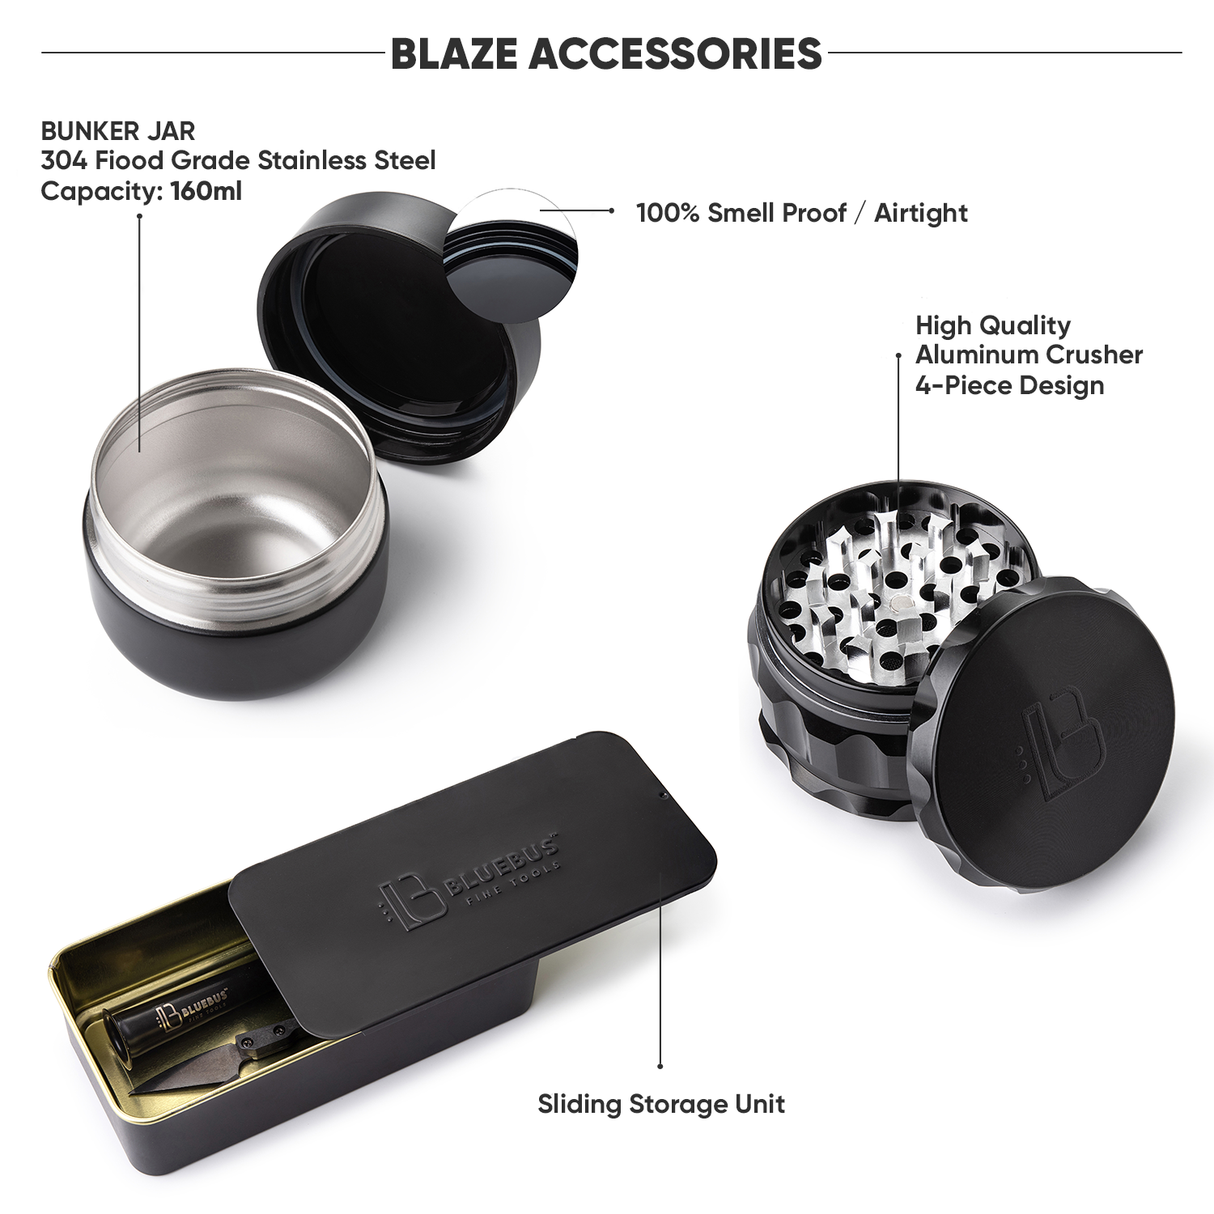 BLAZE Accessories set featuring a stainless steel bunker jar, aluminum 4-piece grinder, and sliding storage unit on a black background.